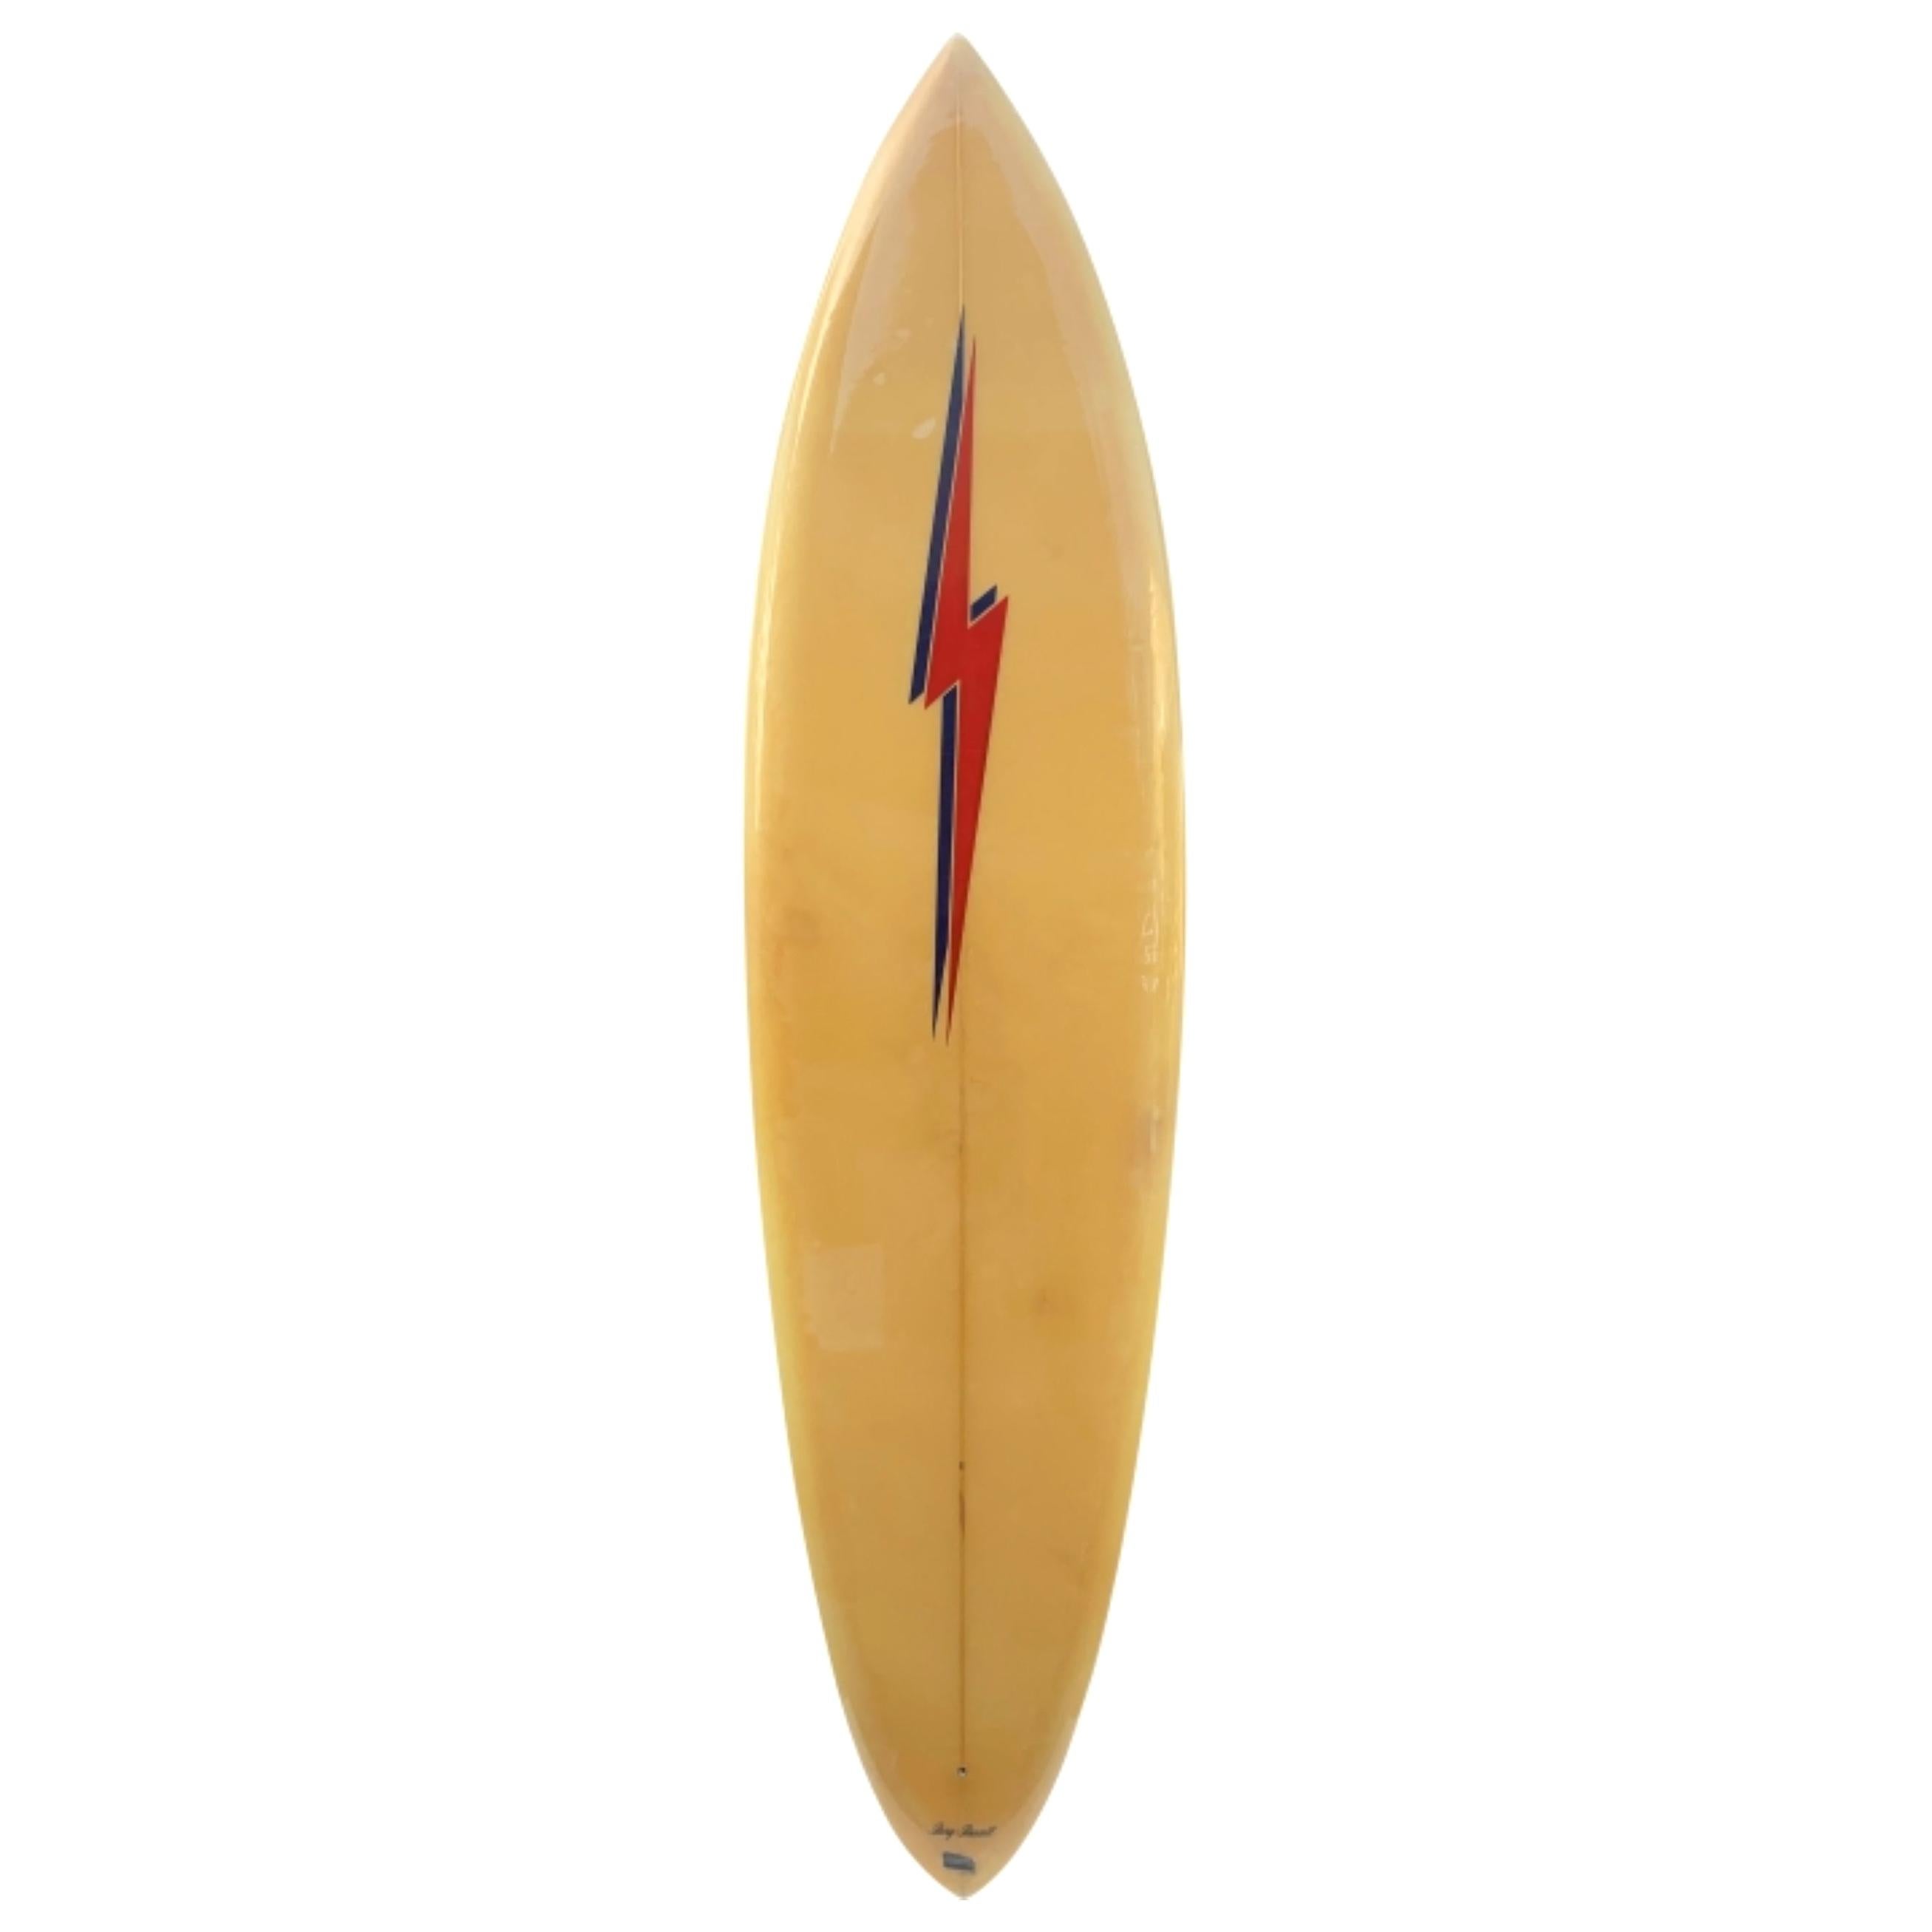 Vintage 1970s Lightning Bolt Surfboard by Rory Russell